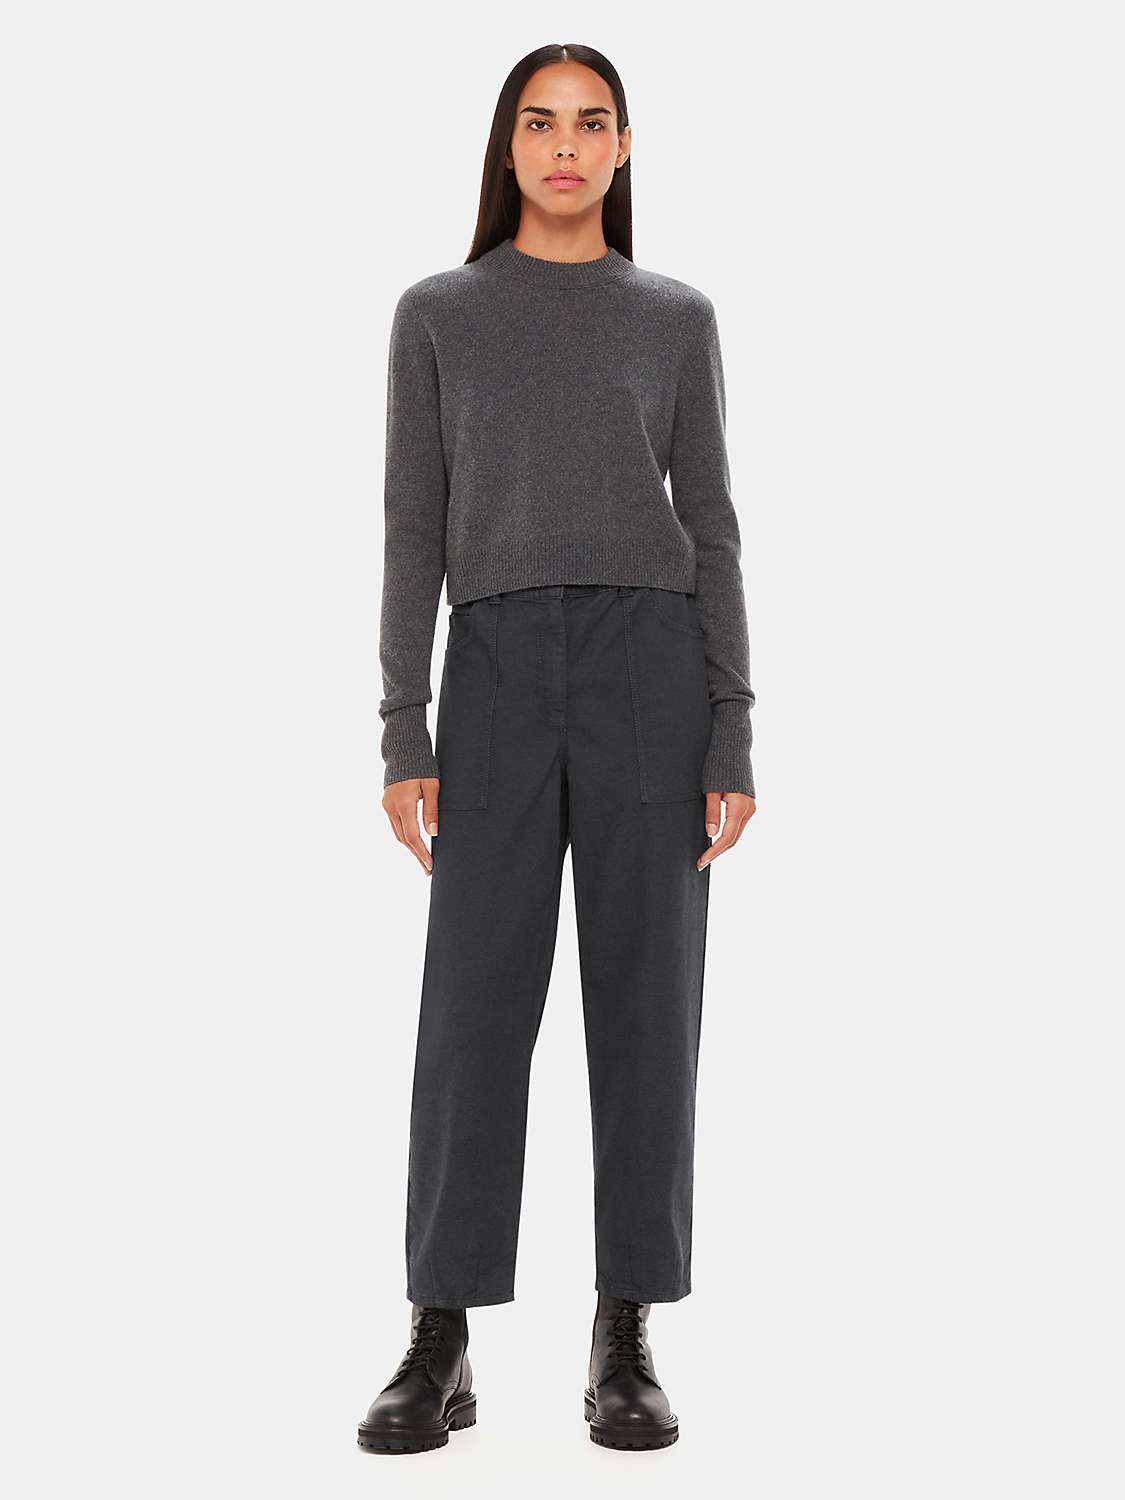 Buy Whistles Petite Tessa Casual Trousers, Black Online at johnlewis.com